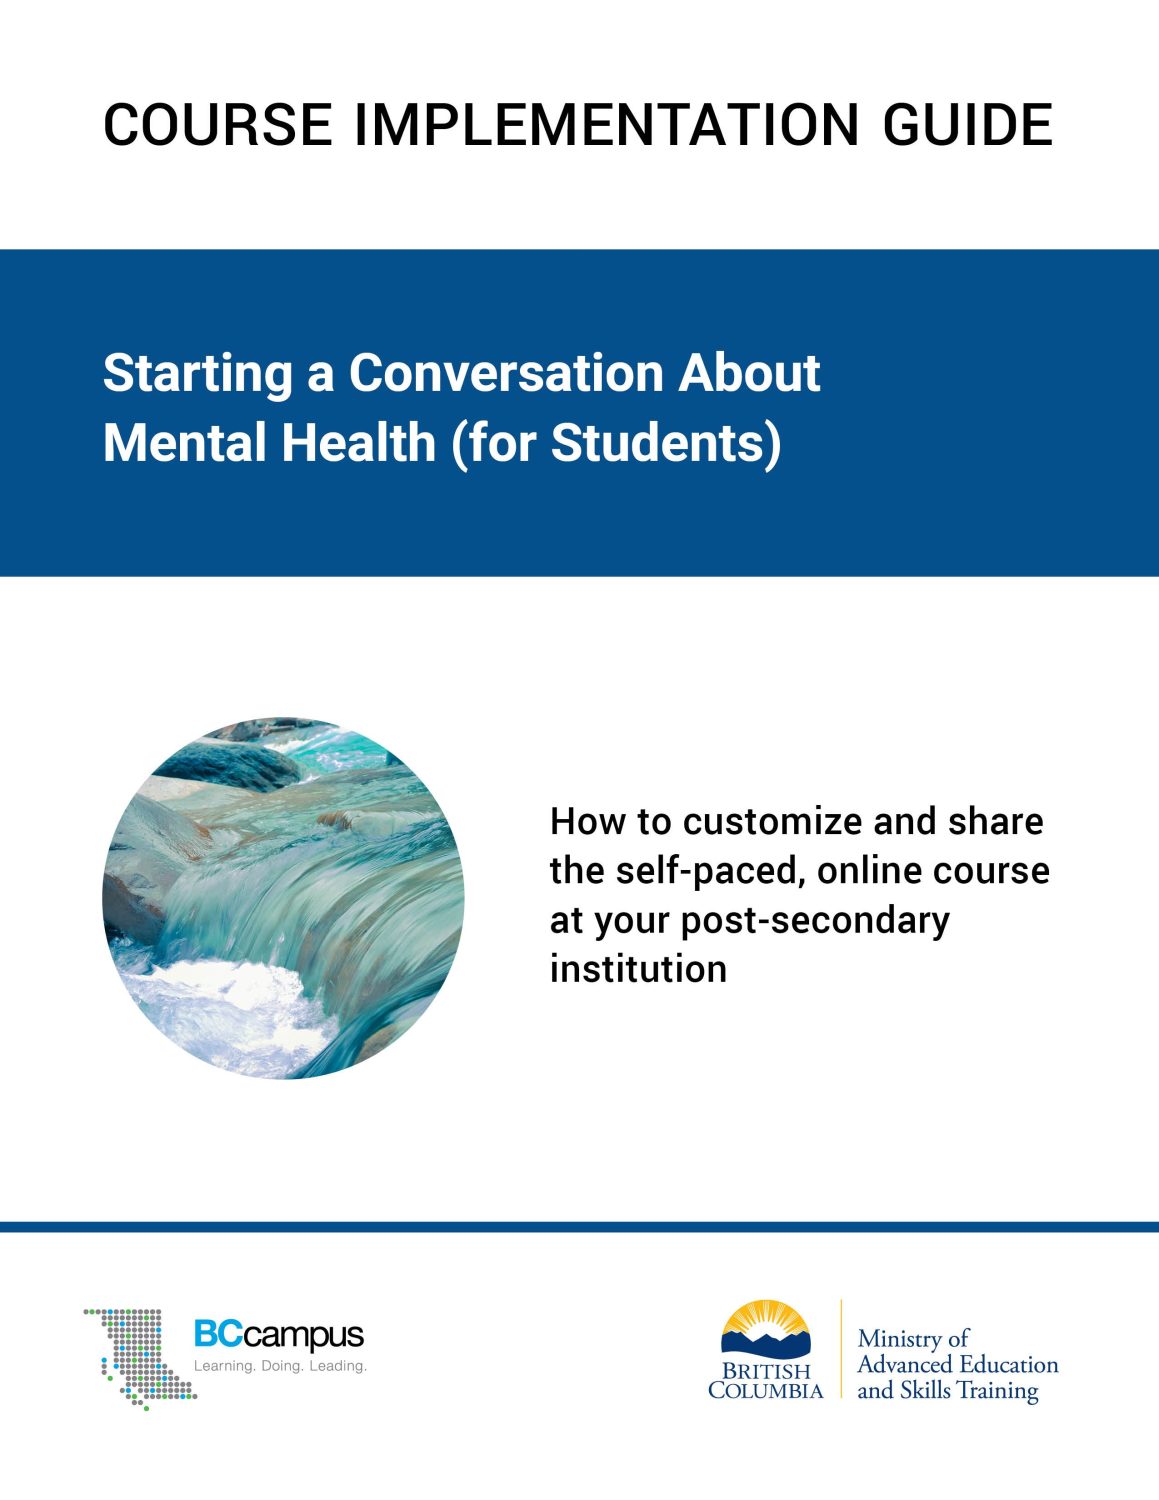 Cover image for Course Implementation Guide for Starting a Conversation About Mental Health (for Students)